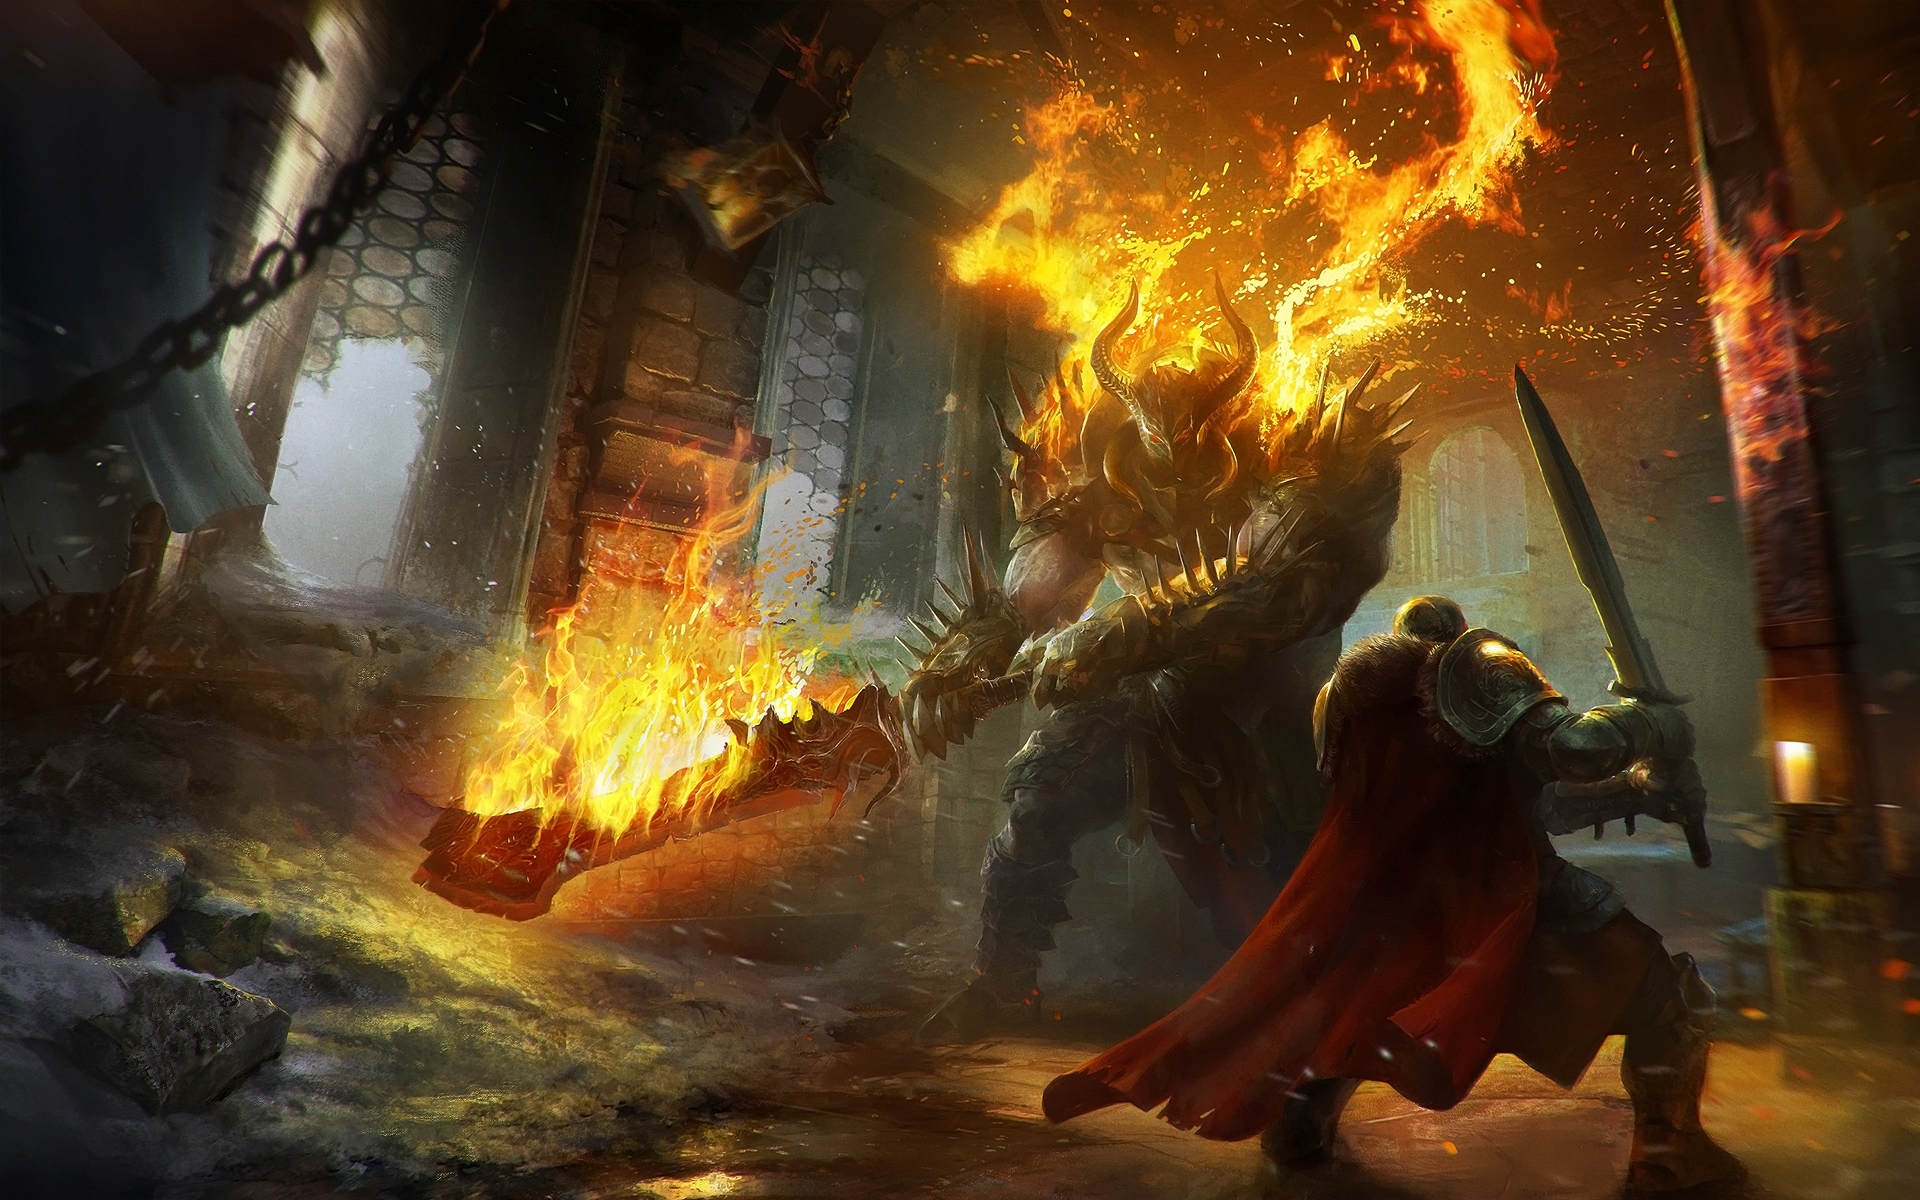 Lords Of The Fallen Art